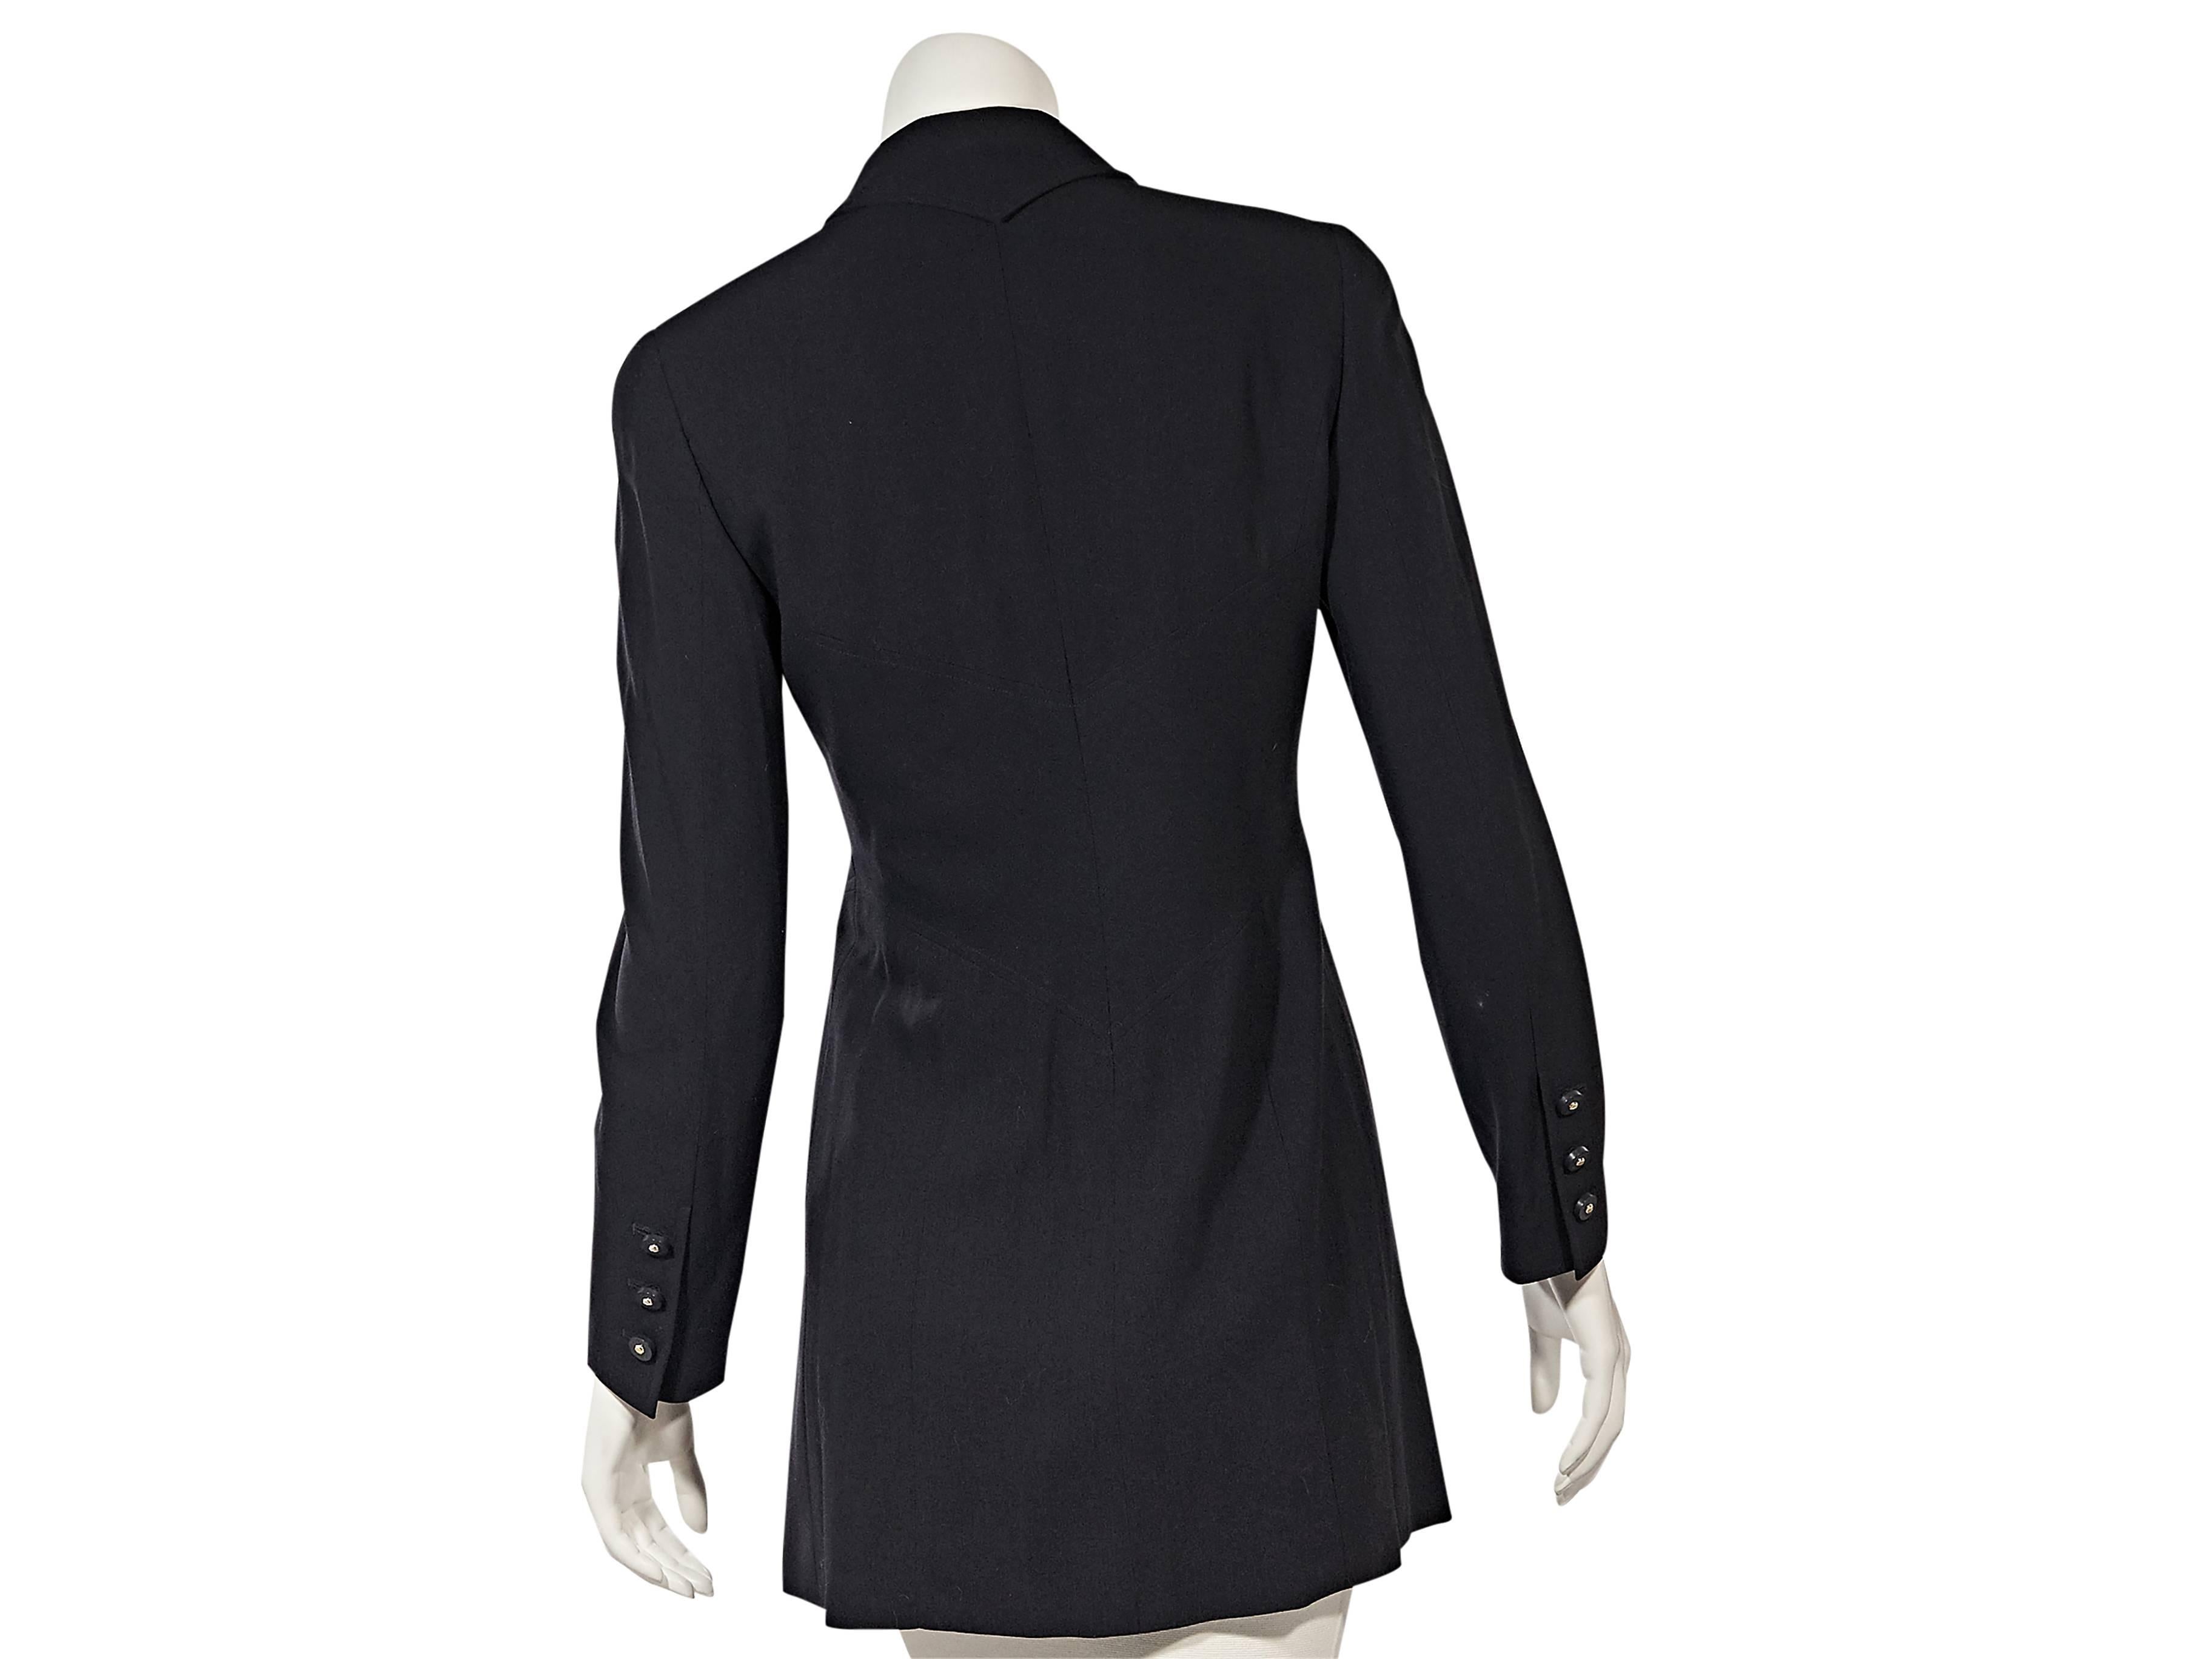 Product details: Vintage navy jacket by Chanel. Peaked lapel. Long sleeves. Three-button detail at cuffs. Button-front closure. Fitted bodice. Waist slash pockets. 
Condition: Very good. 